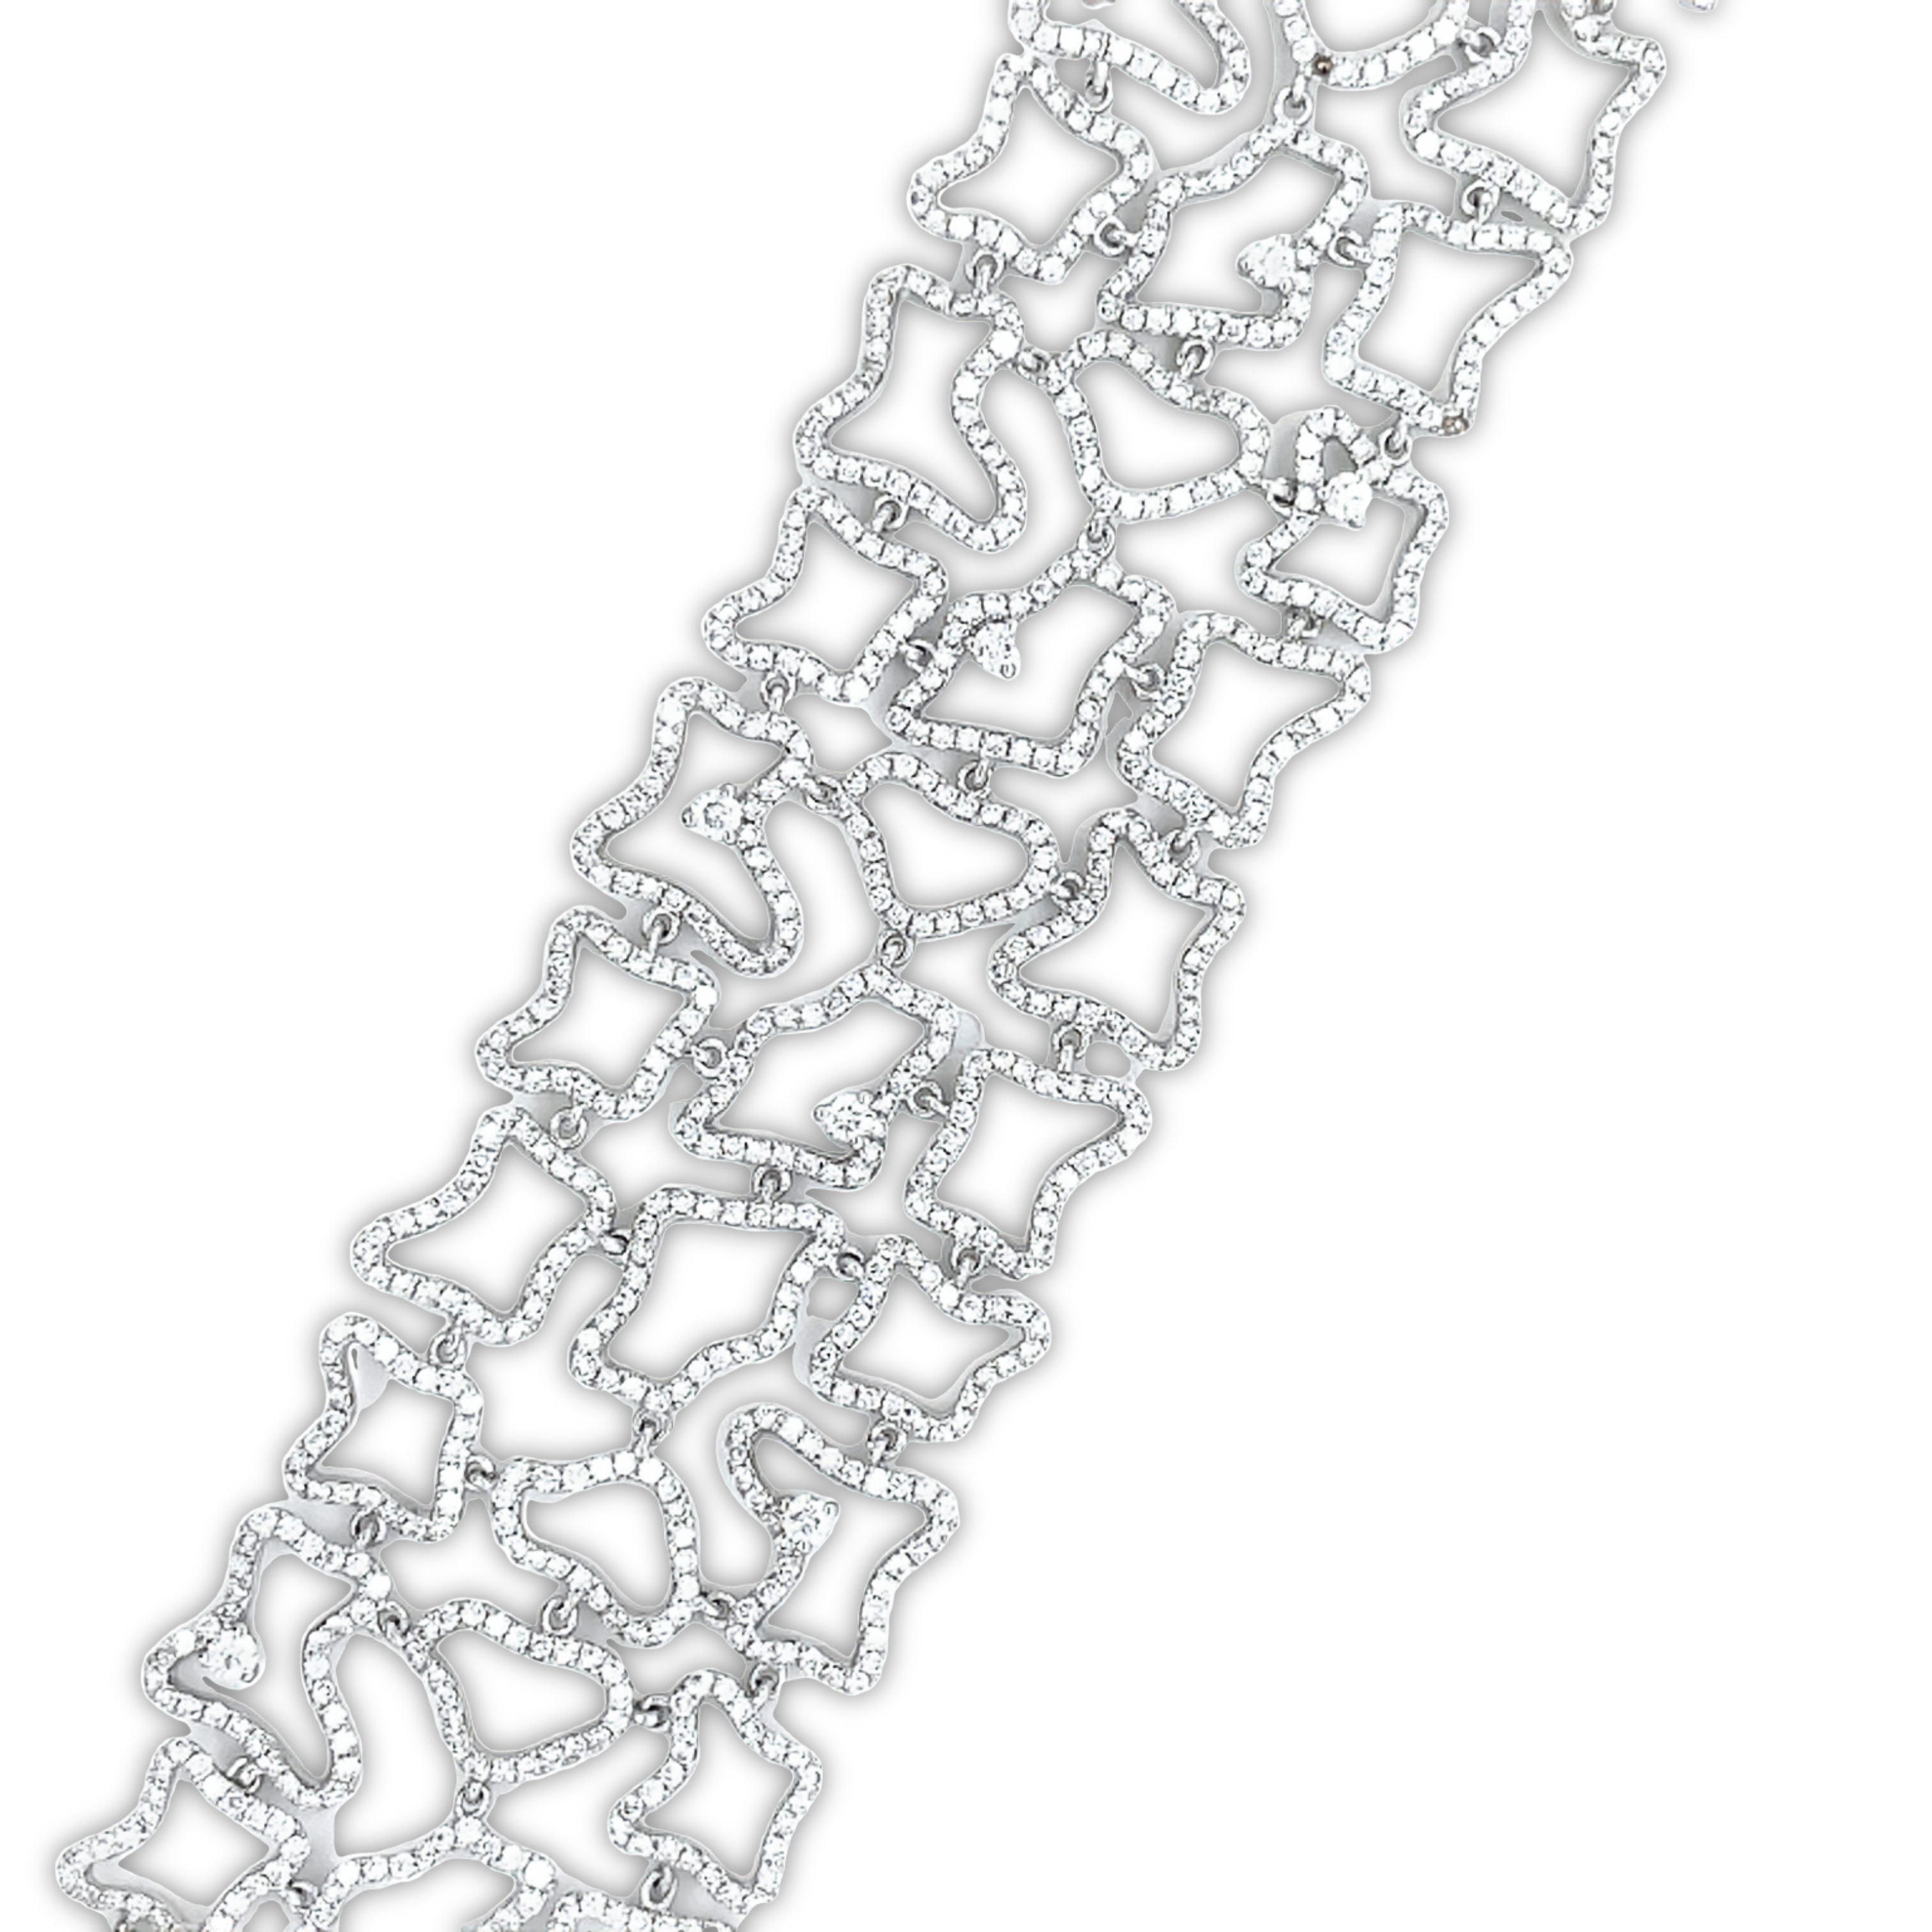 This 18k White Gold Wide Diamond Lattice Bracelet features high quality diamonds weighing 6.19 cts, with an E/F color grade. The width of the bracelet is 1.5" and each side of the sizing loop is 1.5". It is secured with a lobster catch and is 8" long. An incredible piece to behold.